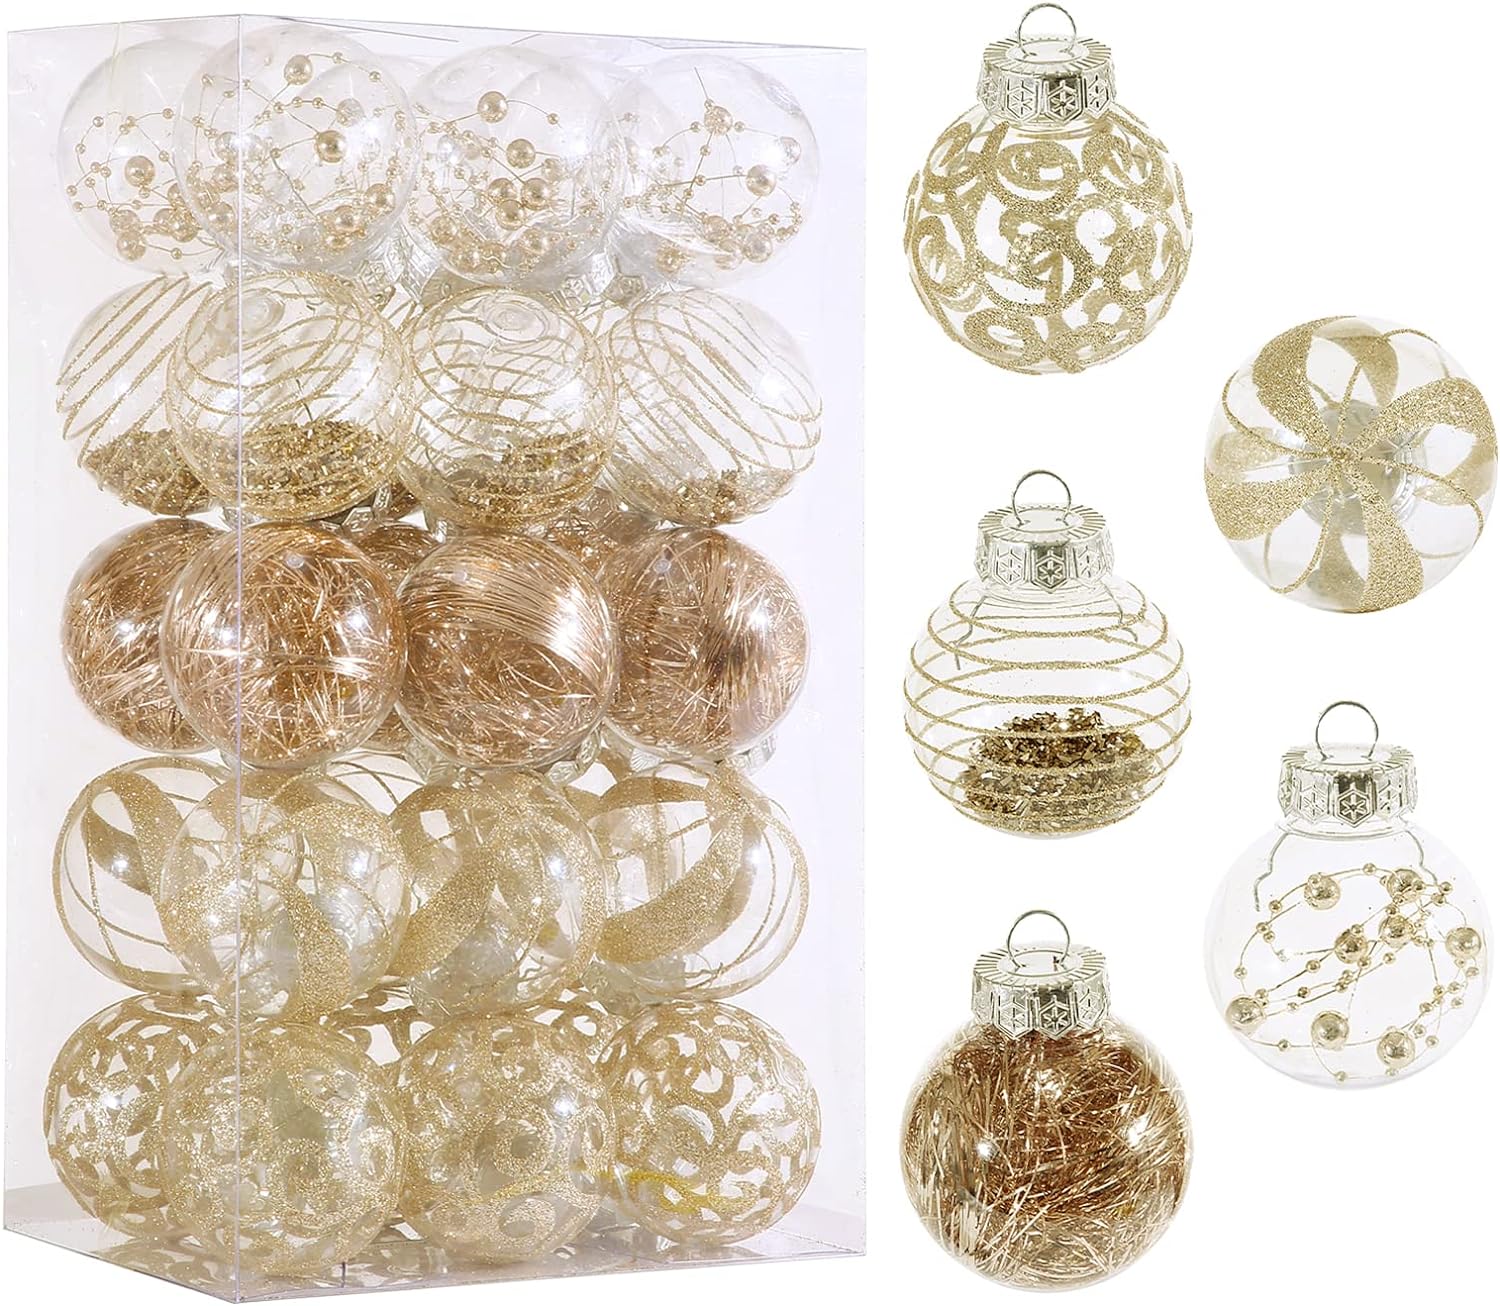 60MM/2.36 Christmas Ornaments Set, 30pcs Clear Christmas Ornaments Champagne Shatterproof Decorative Baubles for Xmas Tree Decoration Christmas Ornament Balls for Holiday Party Indoor Outdoor Decor